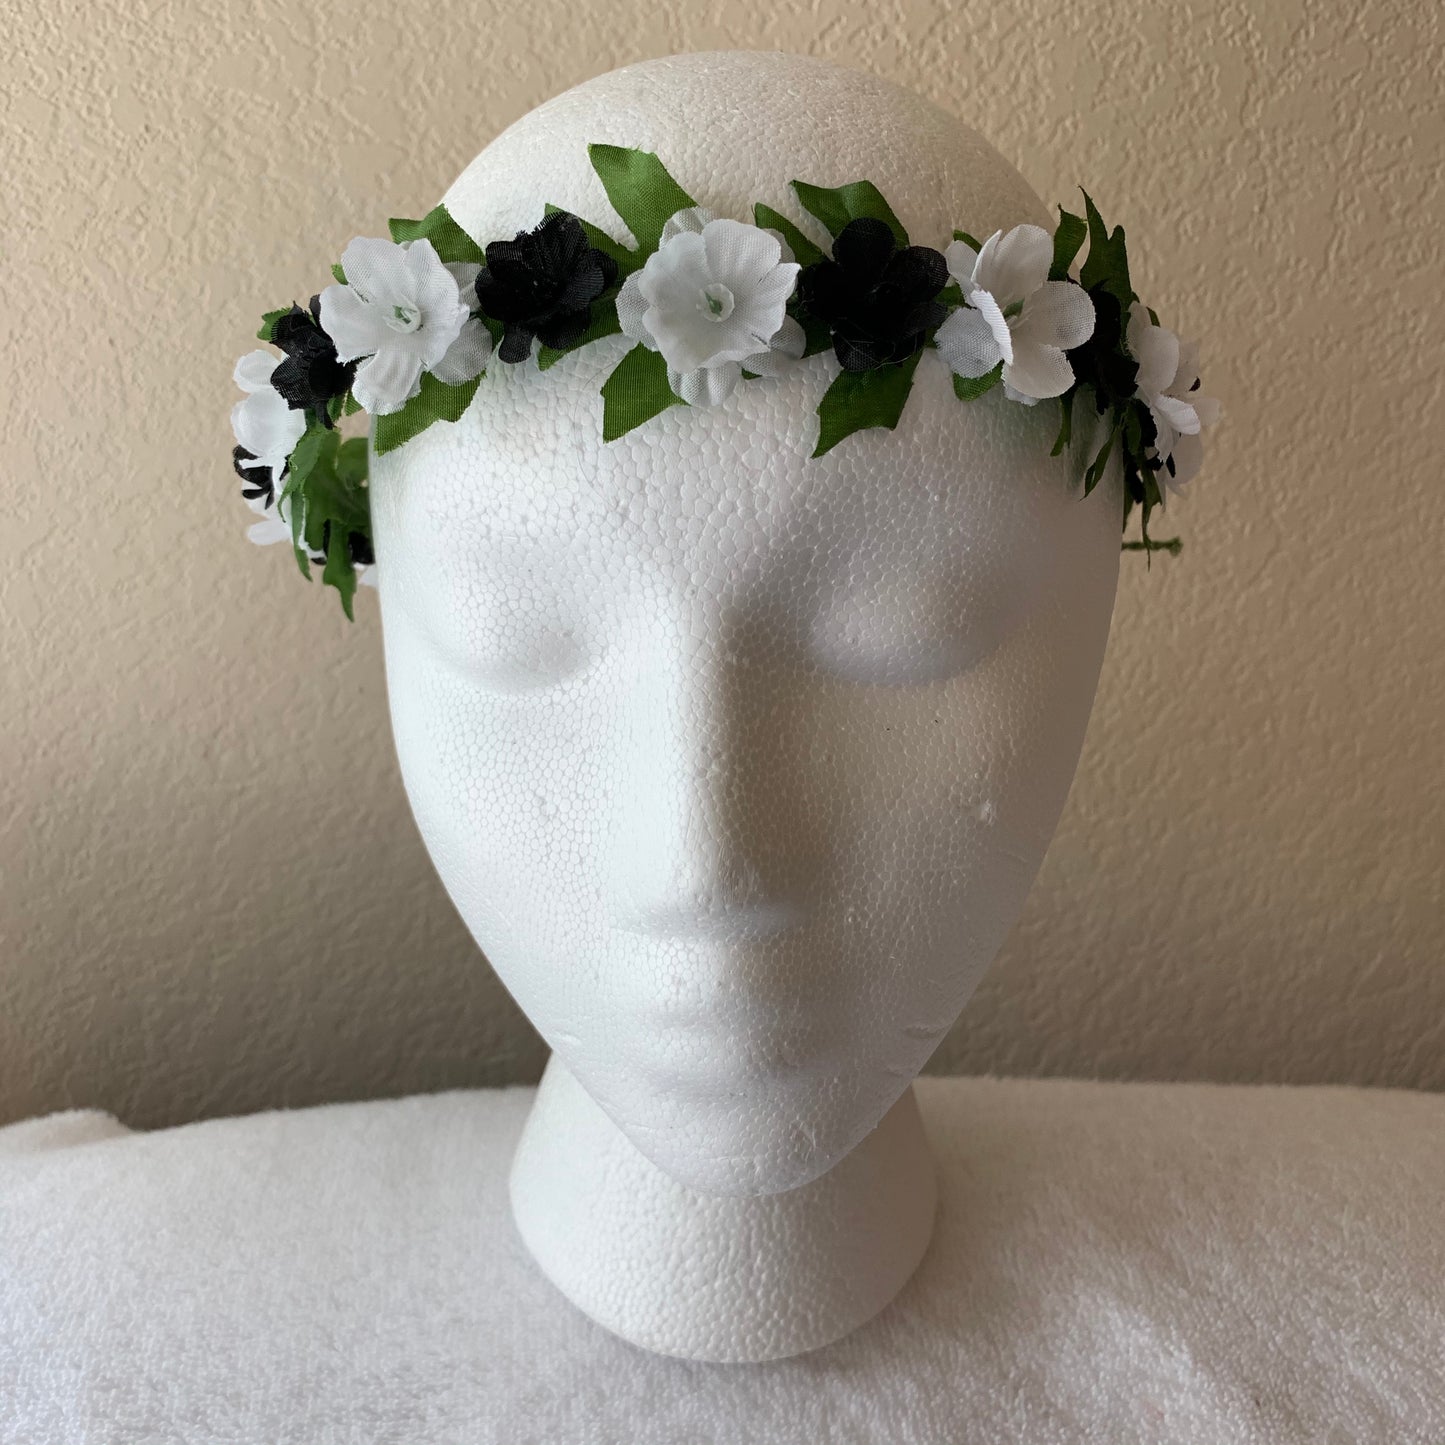 Extra Small Wreath - Black and White Flowers